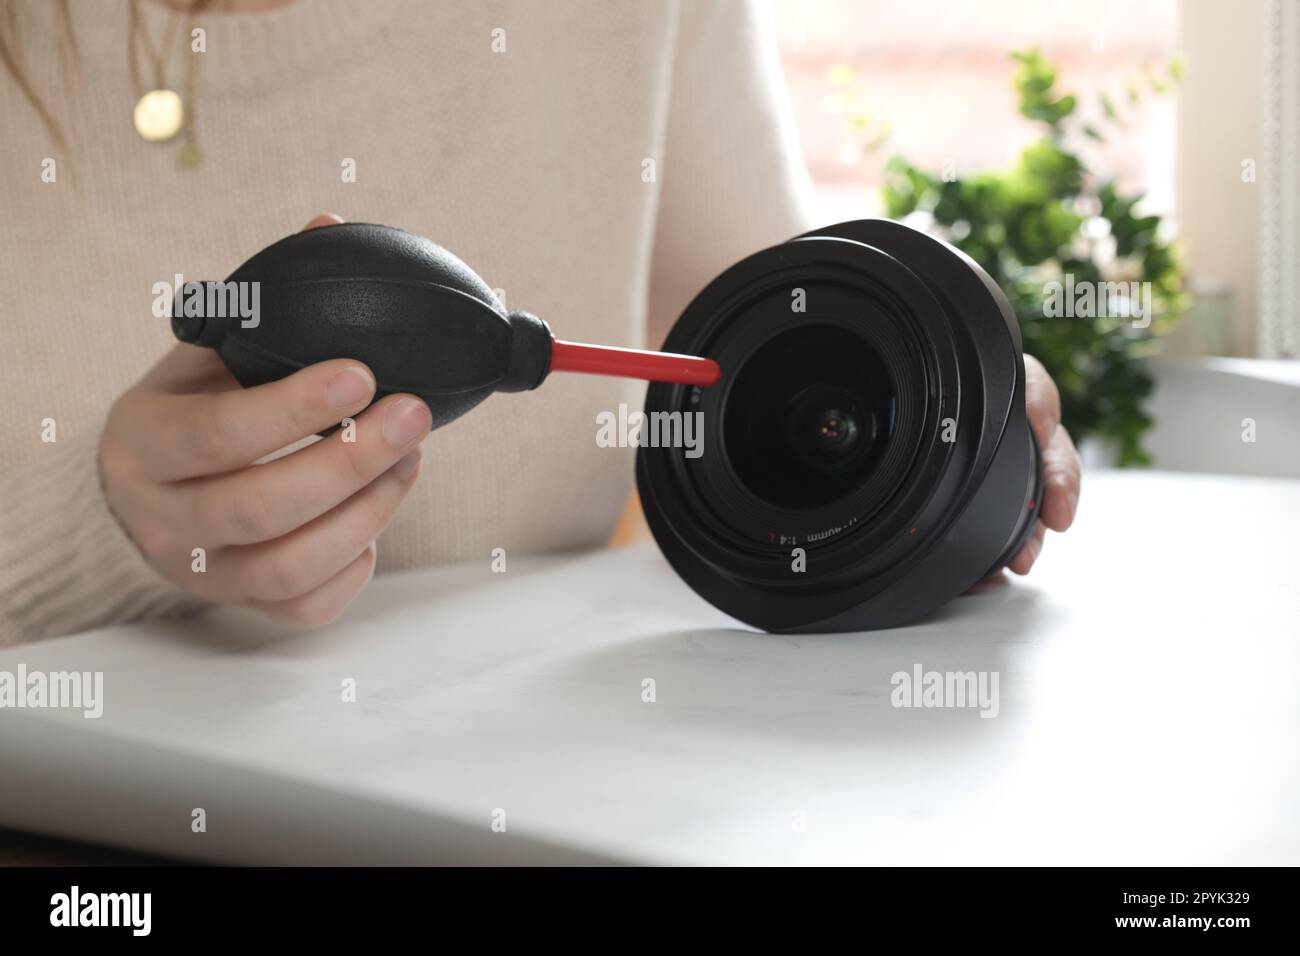 Cleaning digital camera lens, hands cleaning dust from front of lens with a special cleaning kit airbomb on desk Stock Photo